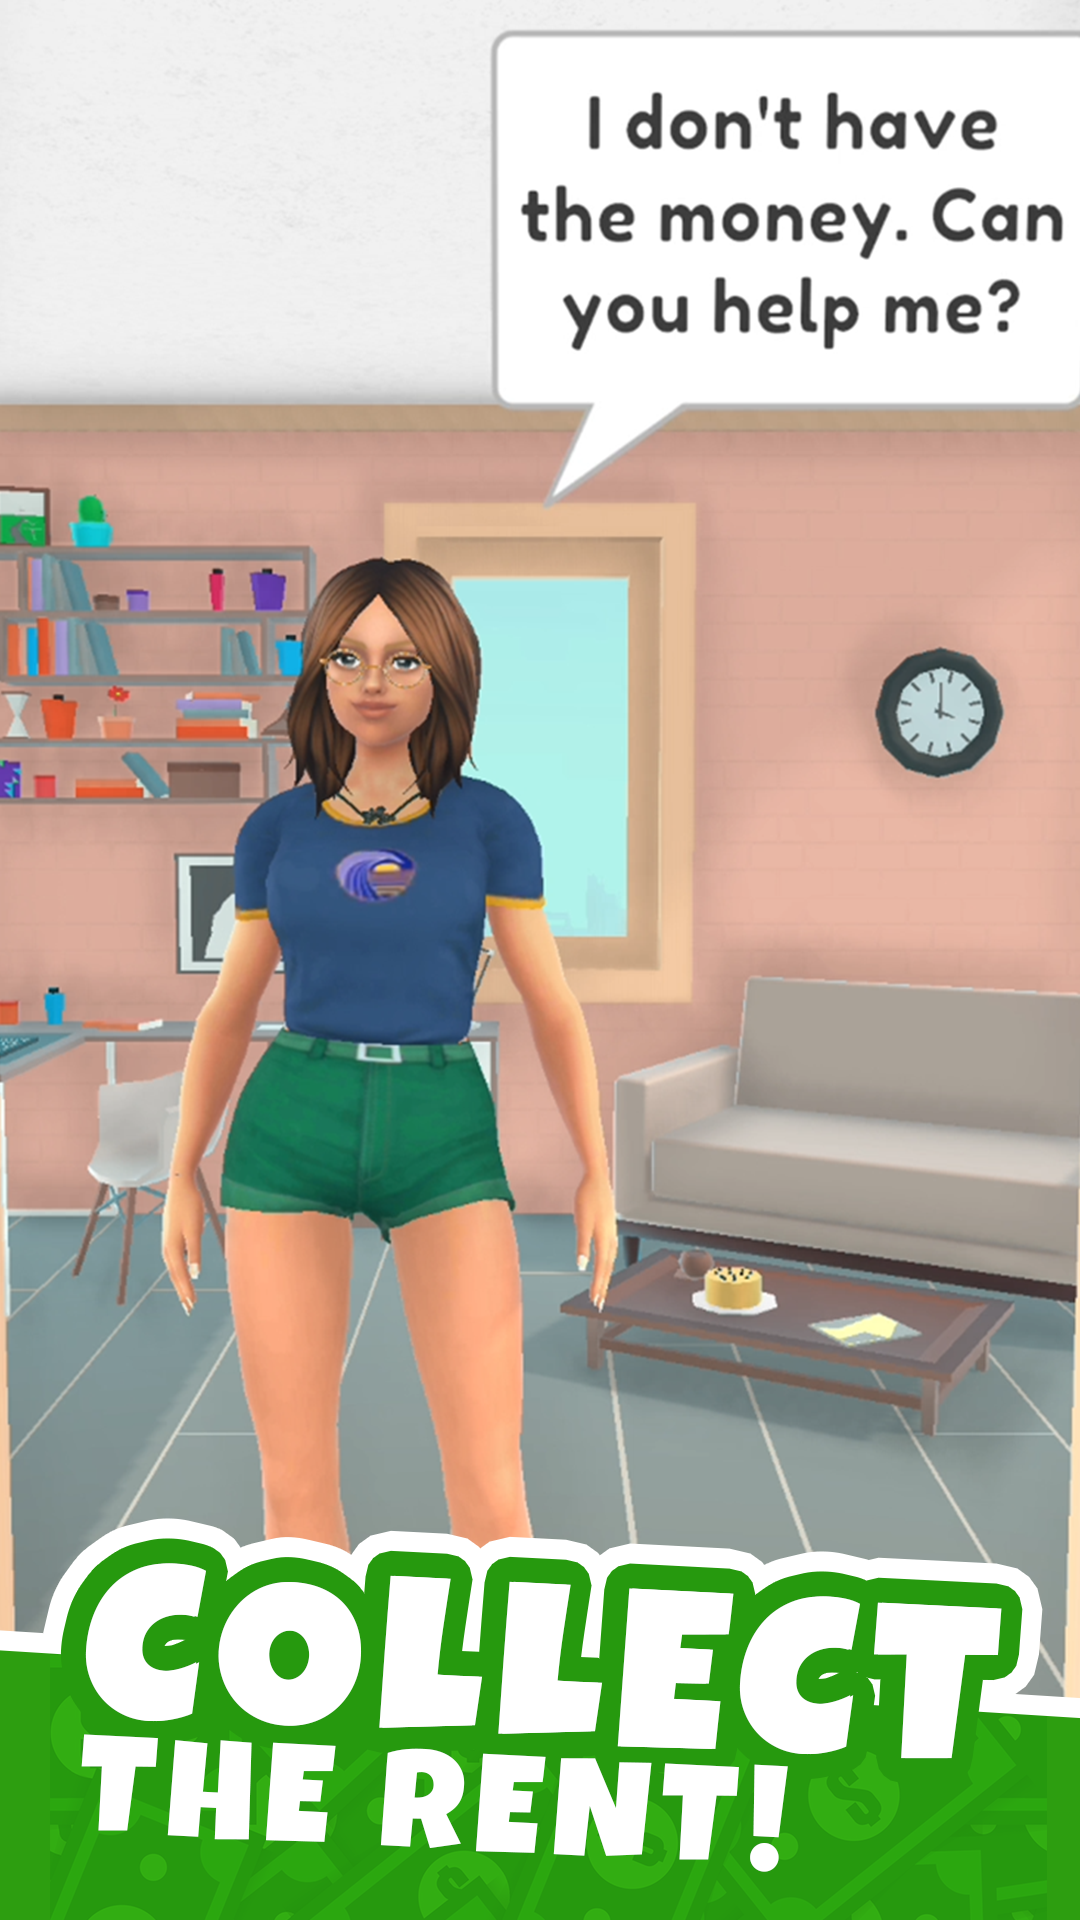 Roleplay as a landlord in The Sims 4's upcoming real-life